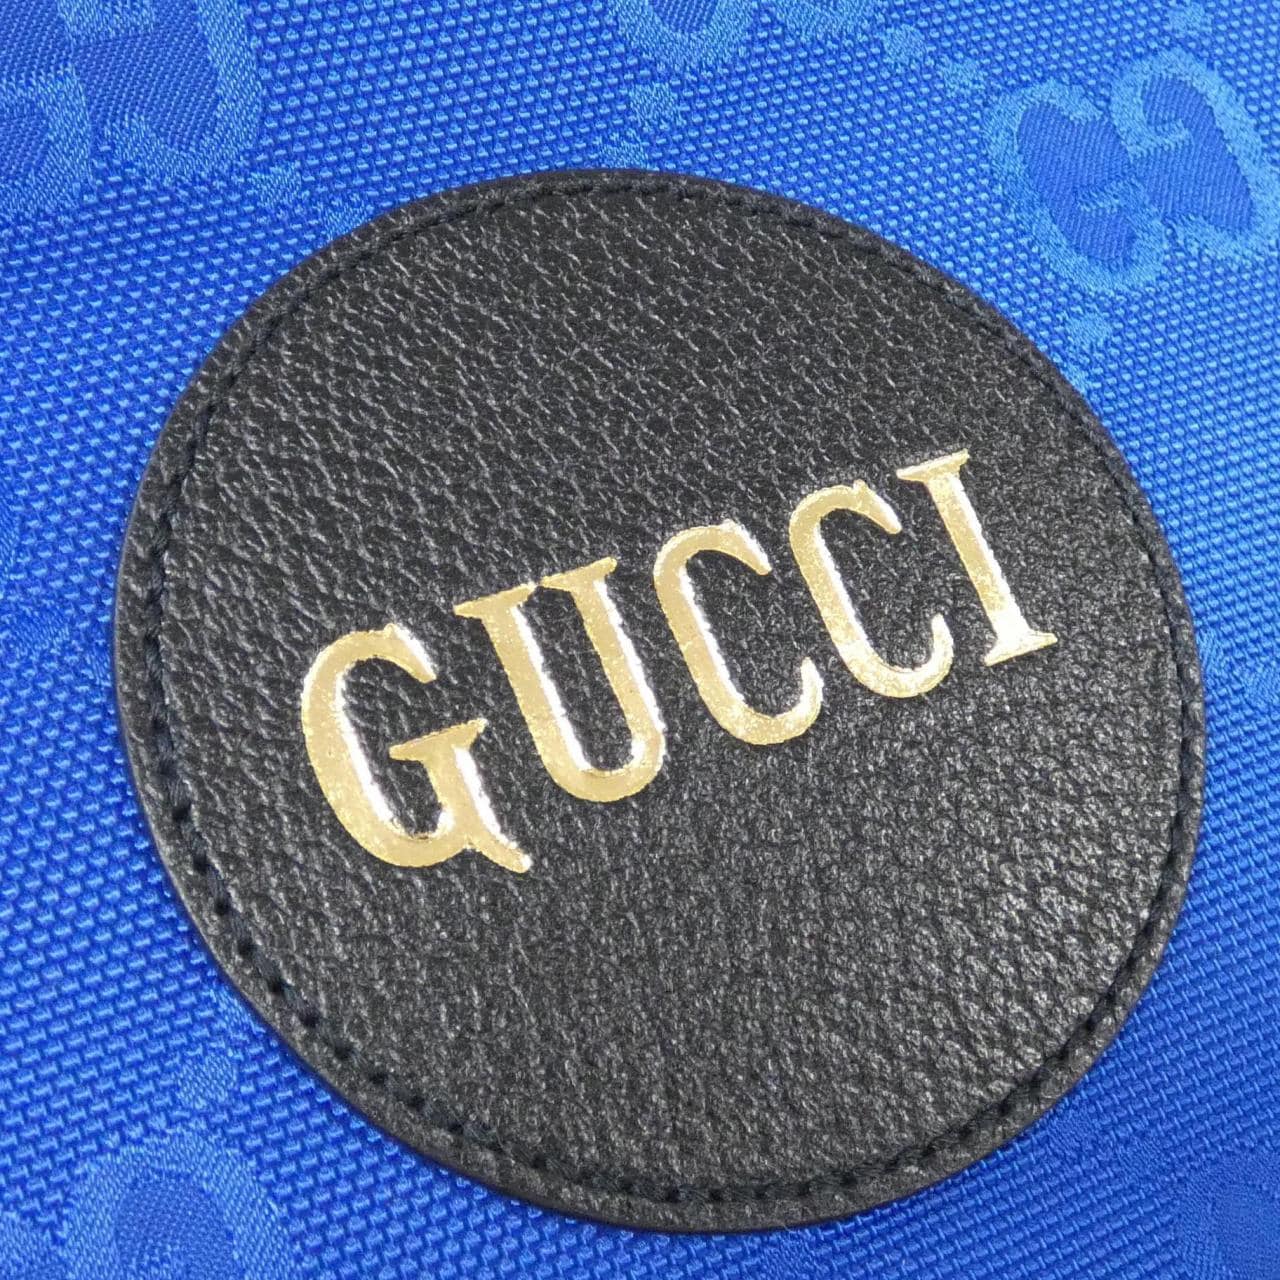 GUCCI OFF THE GRID 630353 H9HAN包包